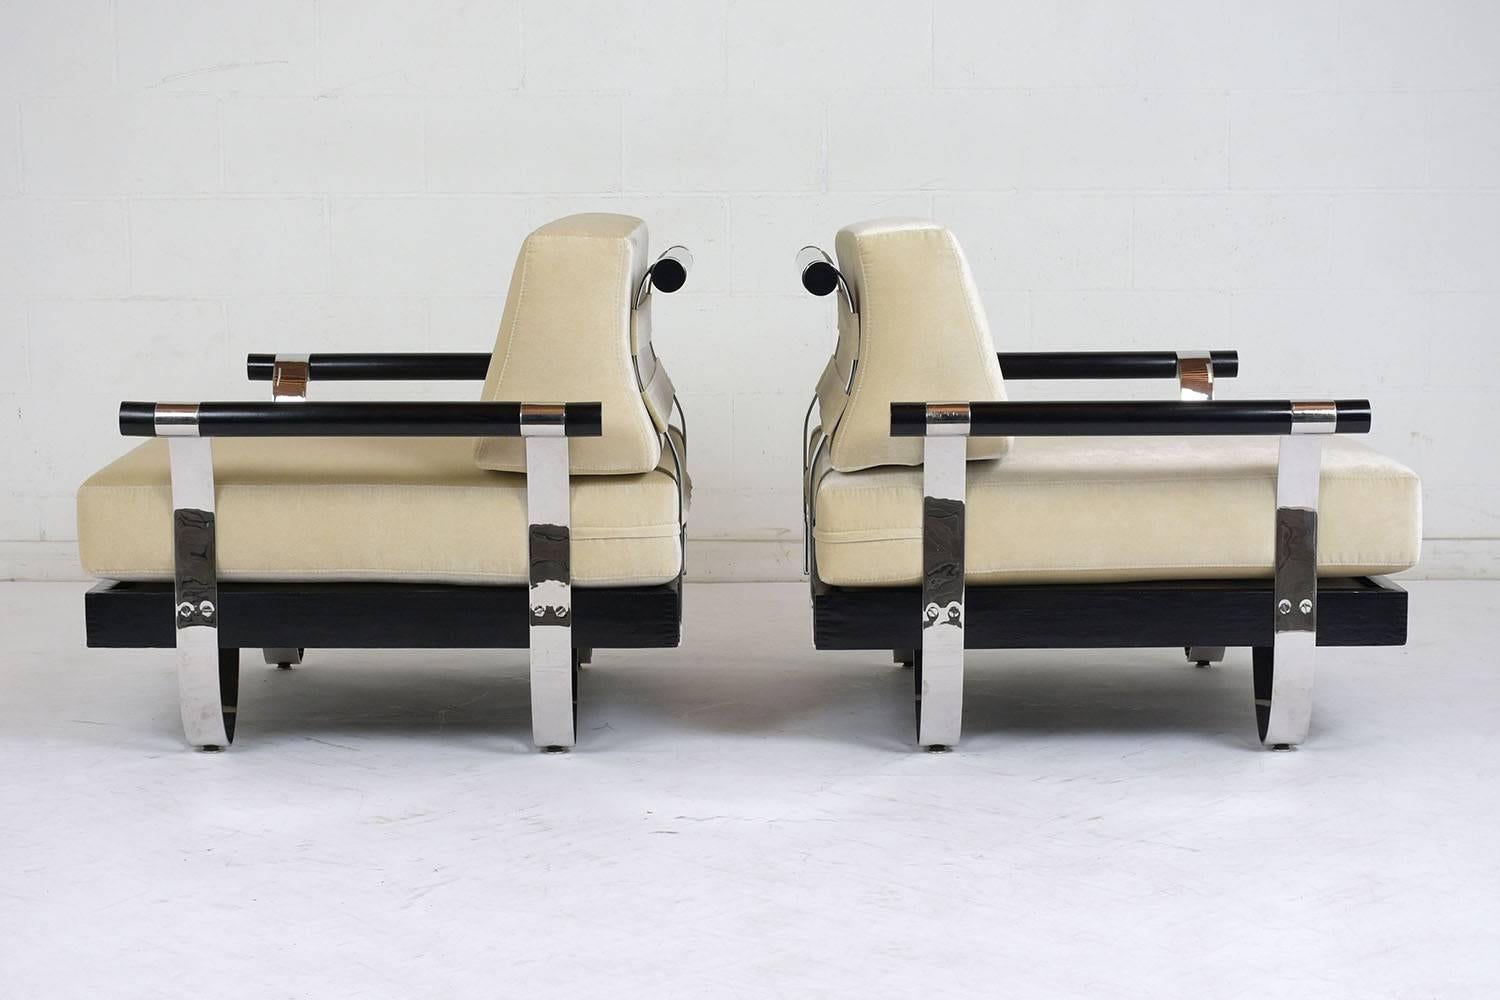 20th Century Pair of Mid-Century Modern Ebonized Wood and Chrome Lounge Chairs